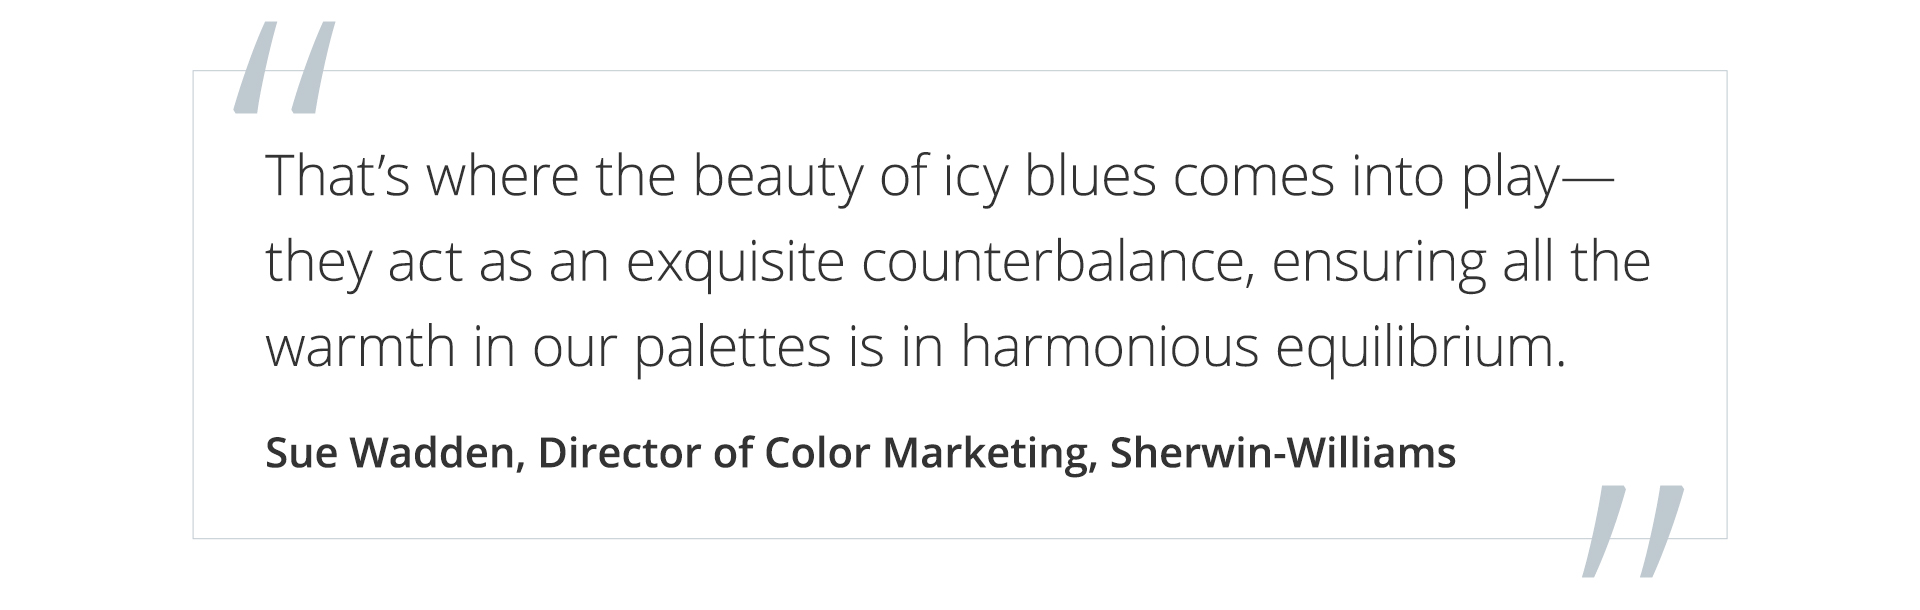 Graphic featuring the quote That’s where the beauty of icy blues comes into play—they act as an exquisite counterbalance, ensuring all the warmth in our palettes is in harmonious equilibrium, by Sue Wadden, Director of Color Marketing at Sherwin-Williams. 